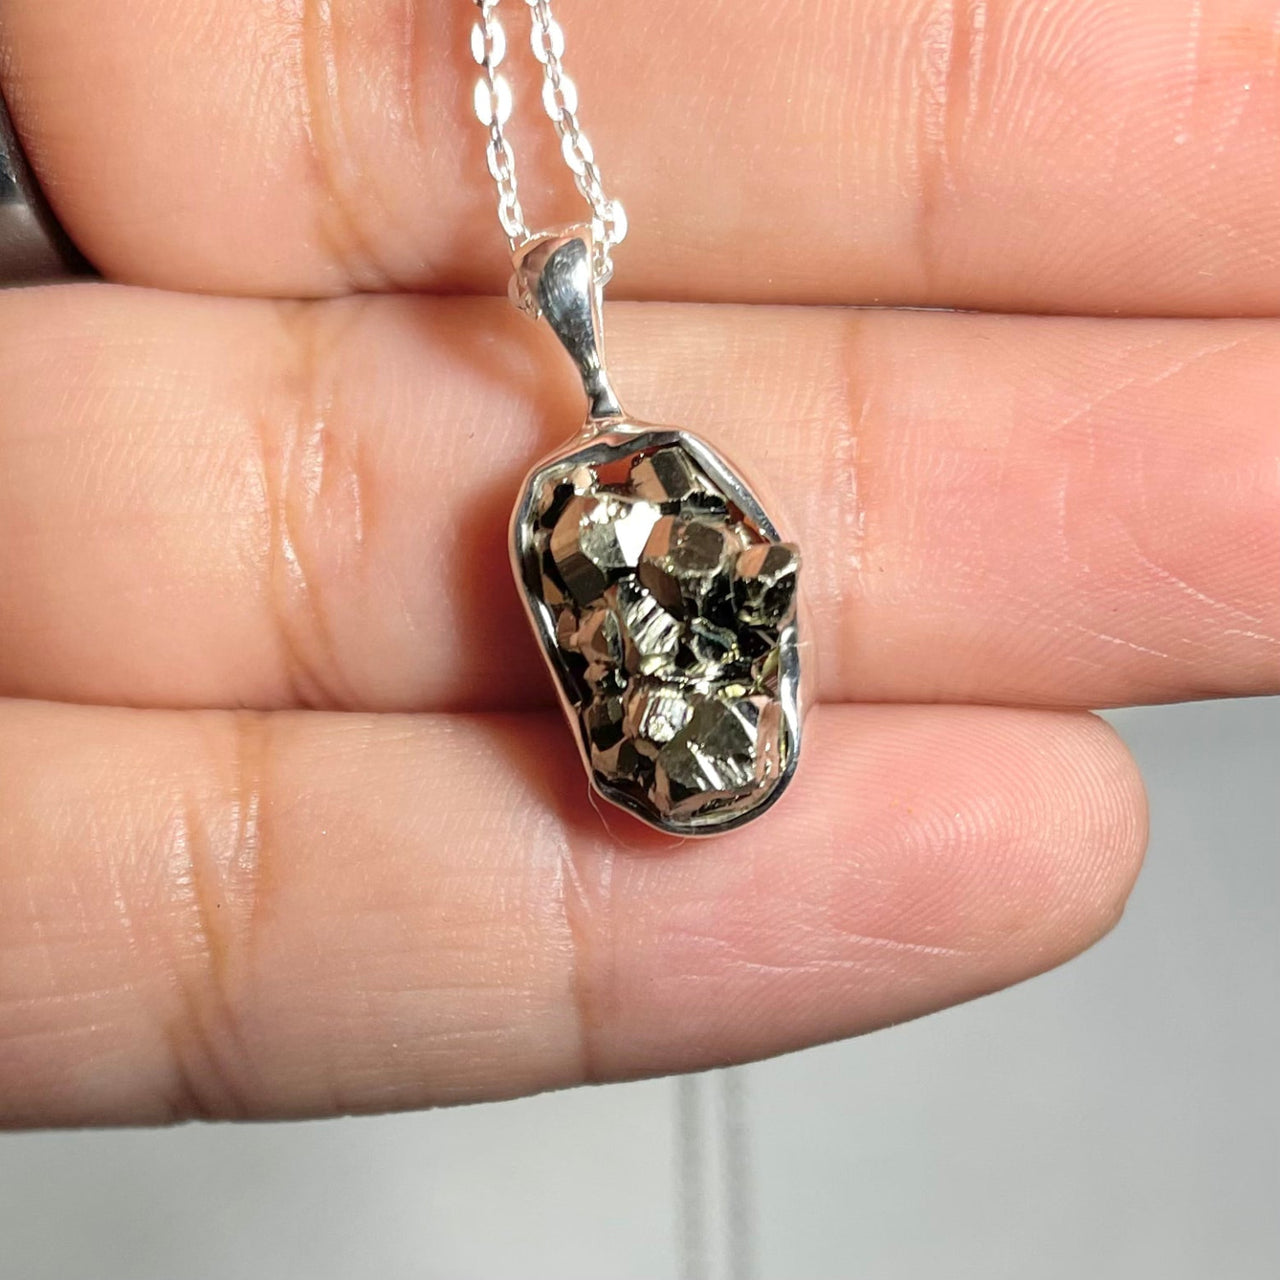 A person holding a Raw Sterling Silver Crystal Pendant, exuding positive energy